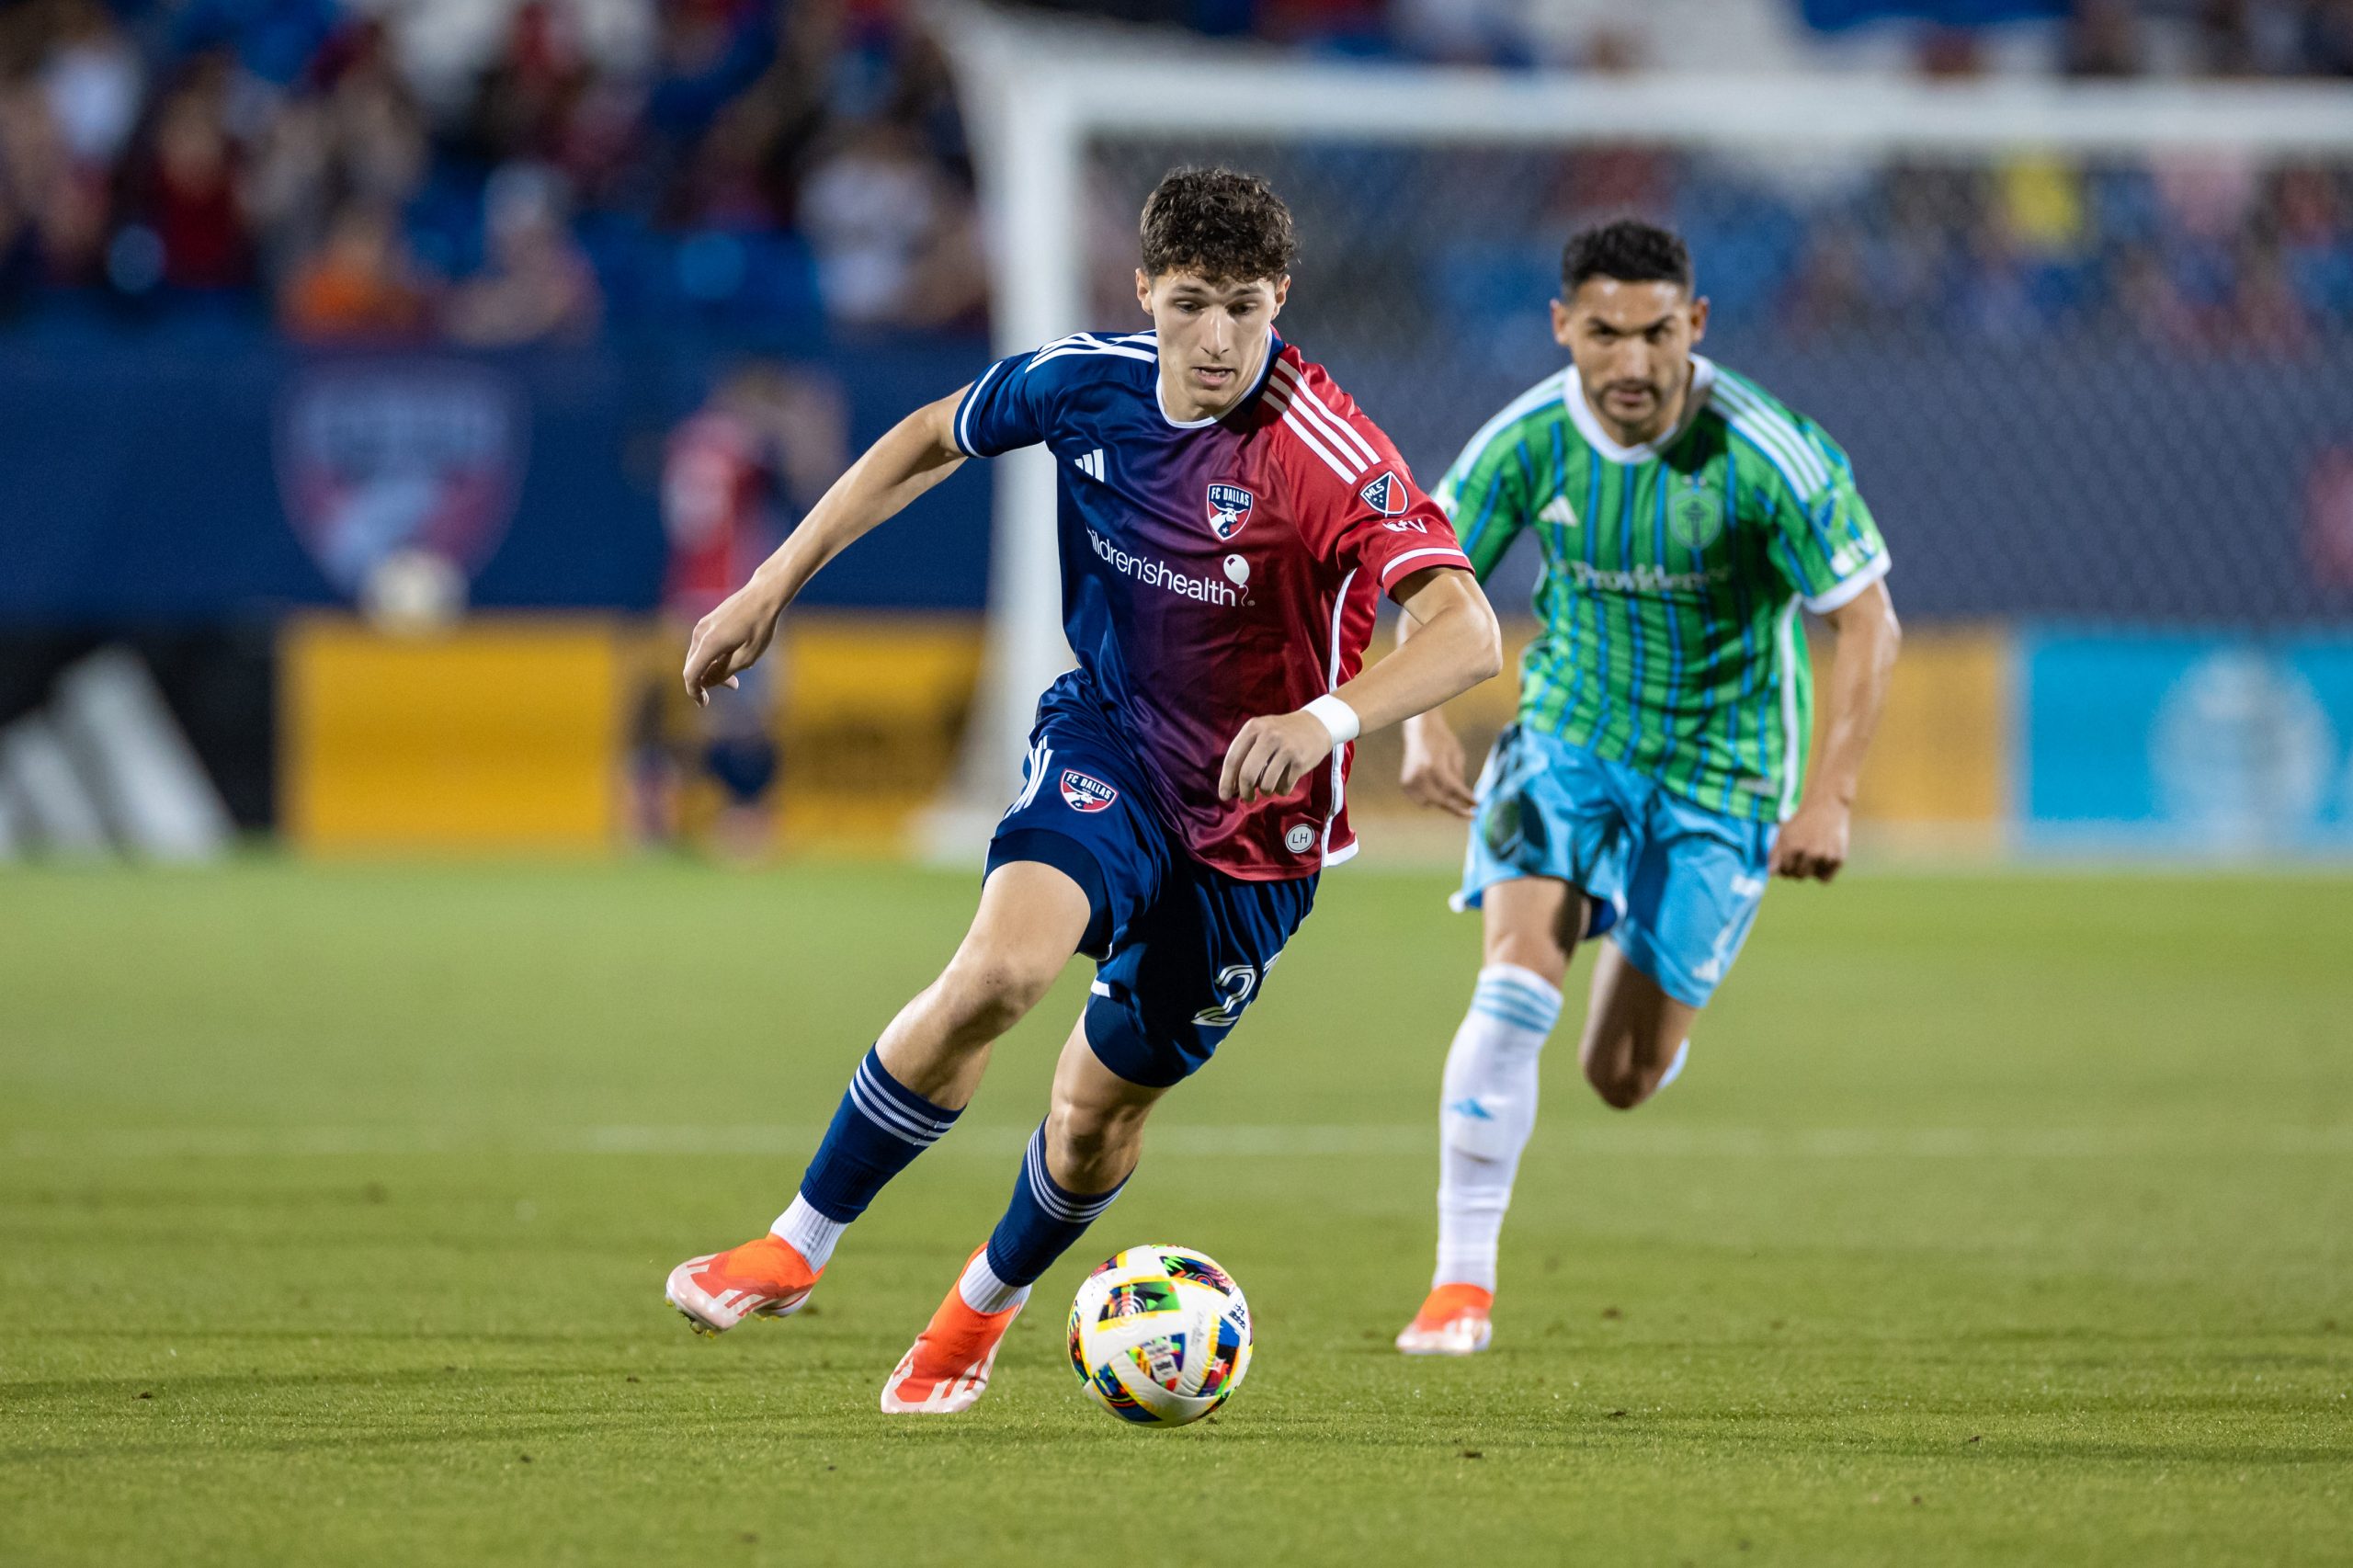 FRISCO, TX - APRIL 13: Logan Farrington cuts inside during the MLS soccer game between FC Dallas and Seattle Sounders FC on April 13, 2024 at Toyota Stadium in Frisco, TX. (Photo by Matthew Visinsky/Icon Sportswire)